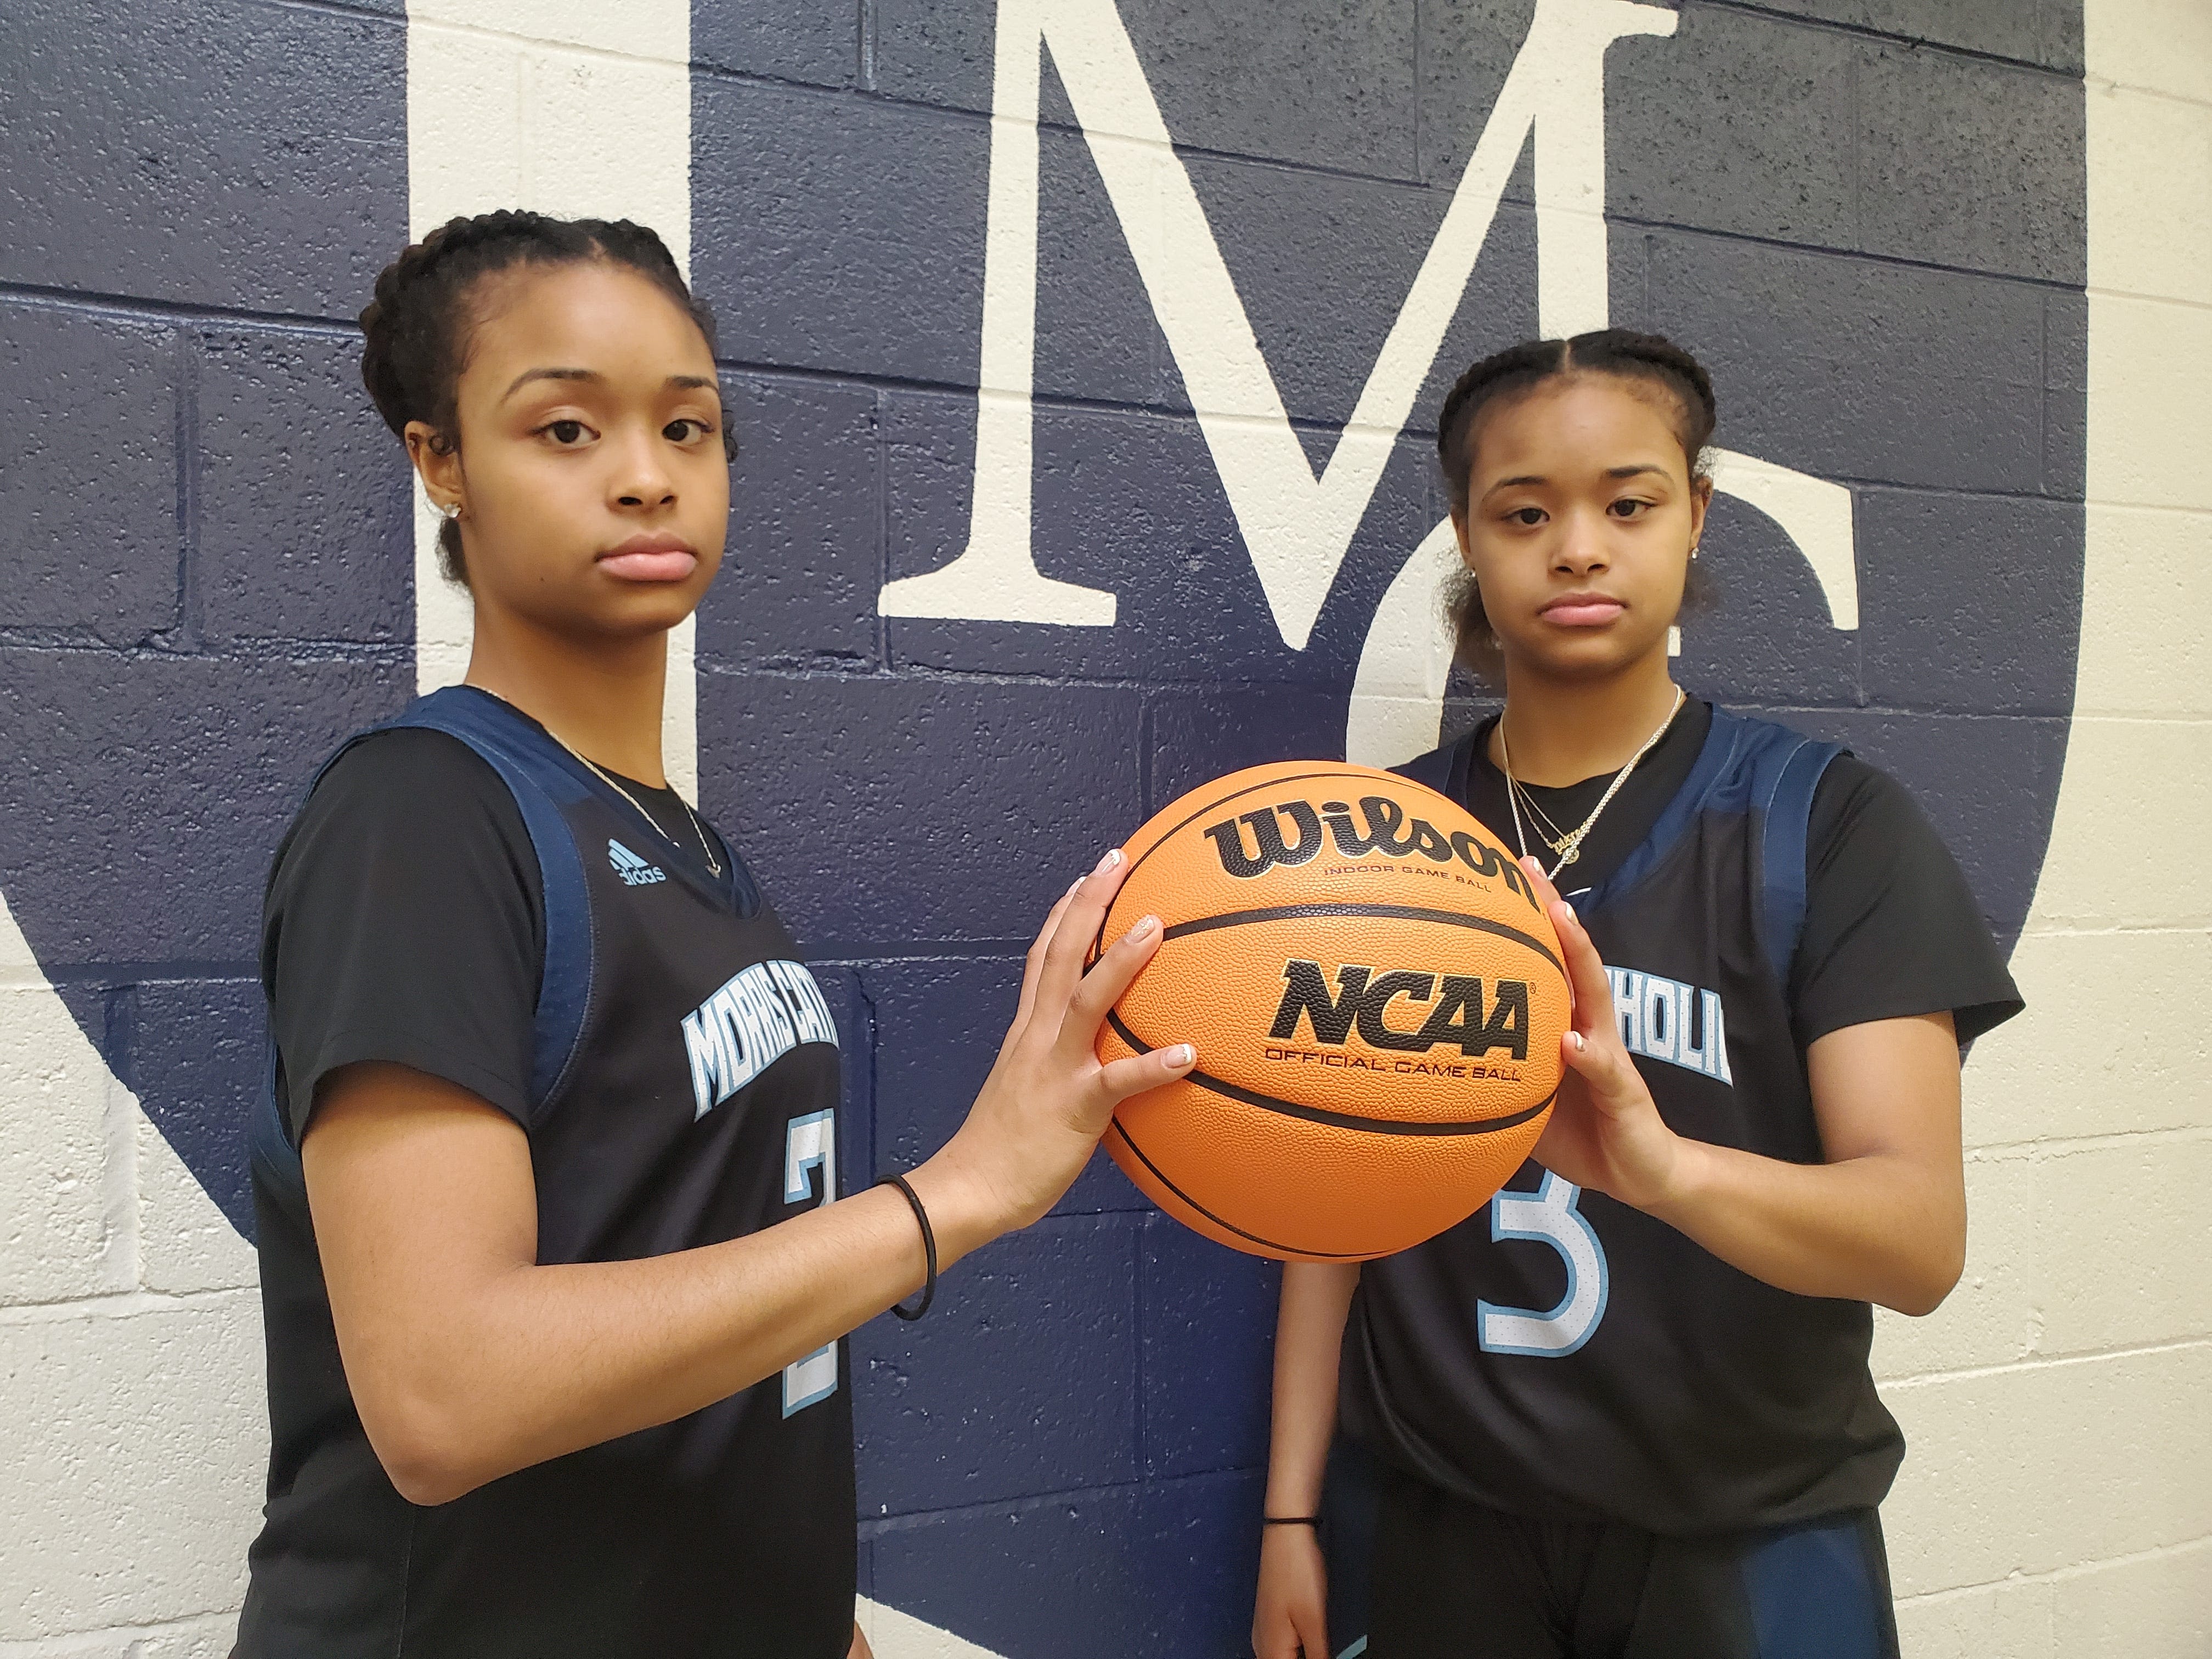 Kim Caldwell lands 1st high school commits as Lady Vols coach with 2025 guards Mia and Mya Pauldo